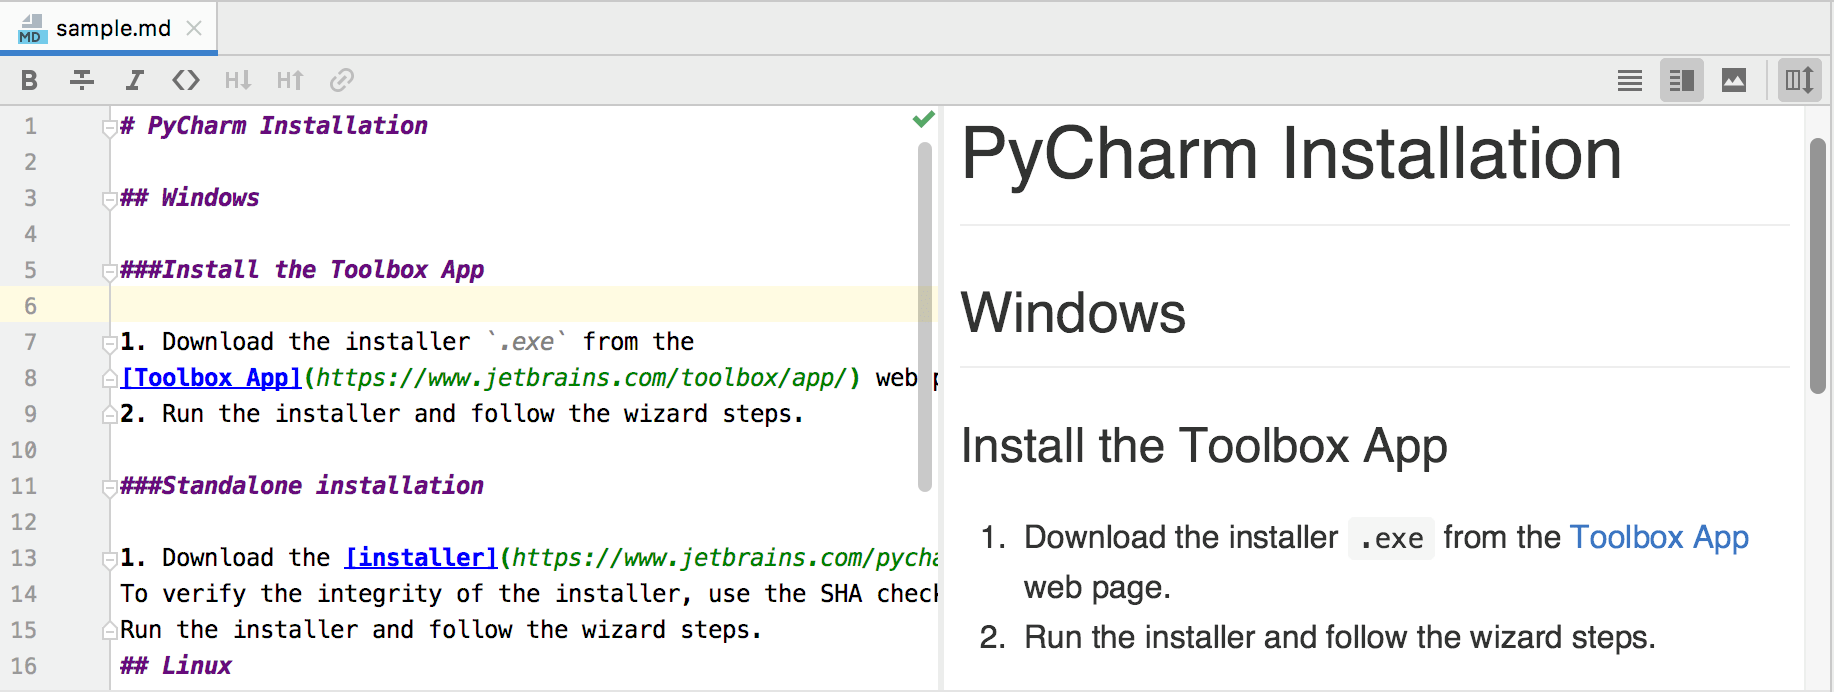 Markdown editor and live preview pane